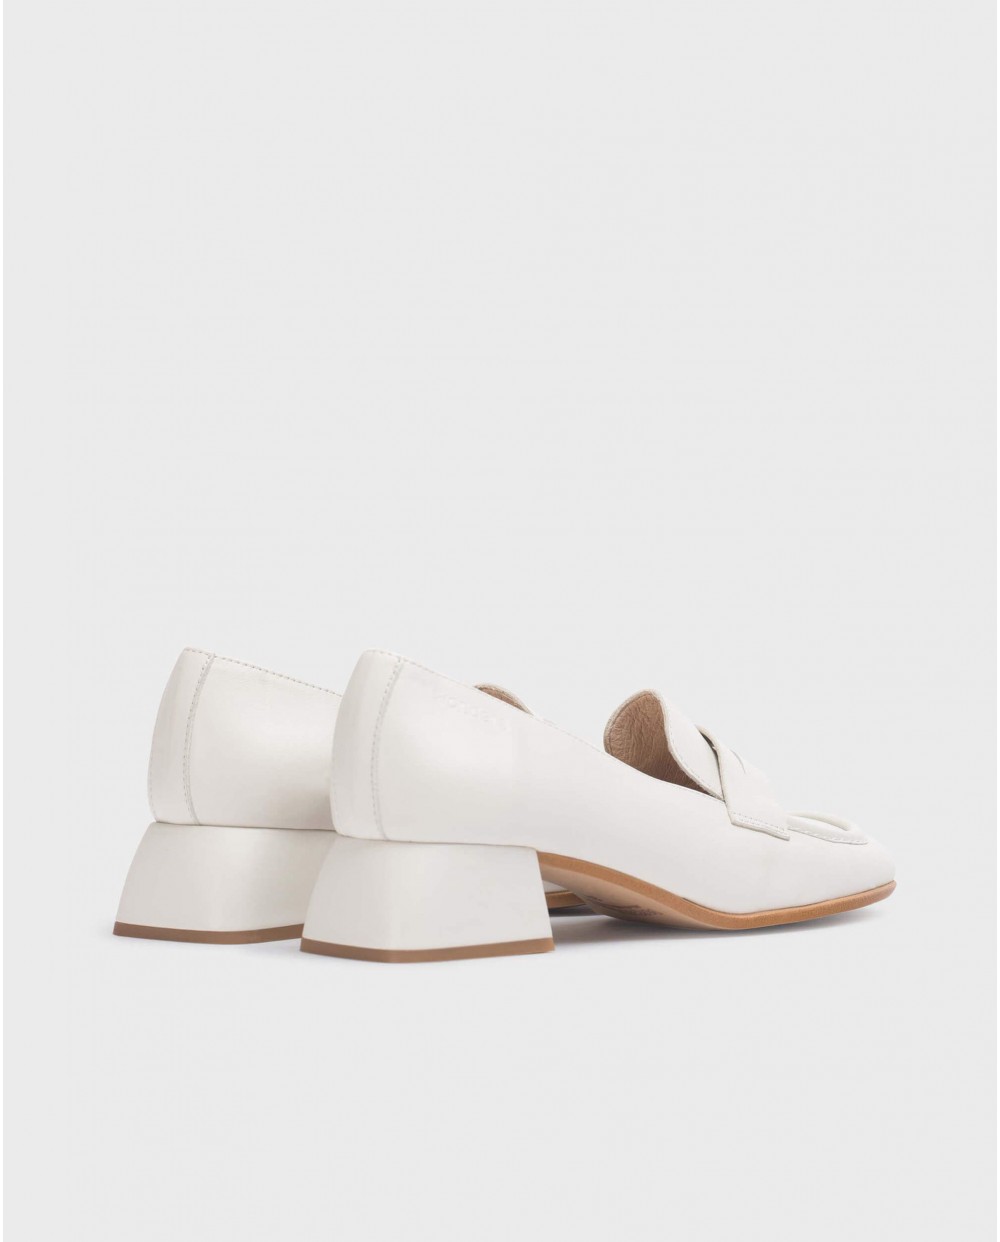 Wonders-Outlet-White Gift moccasin